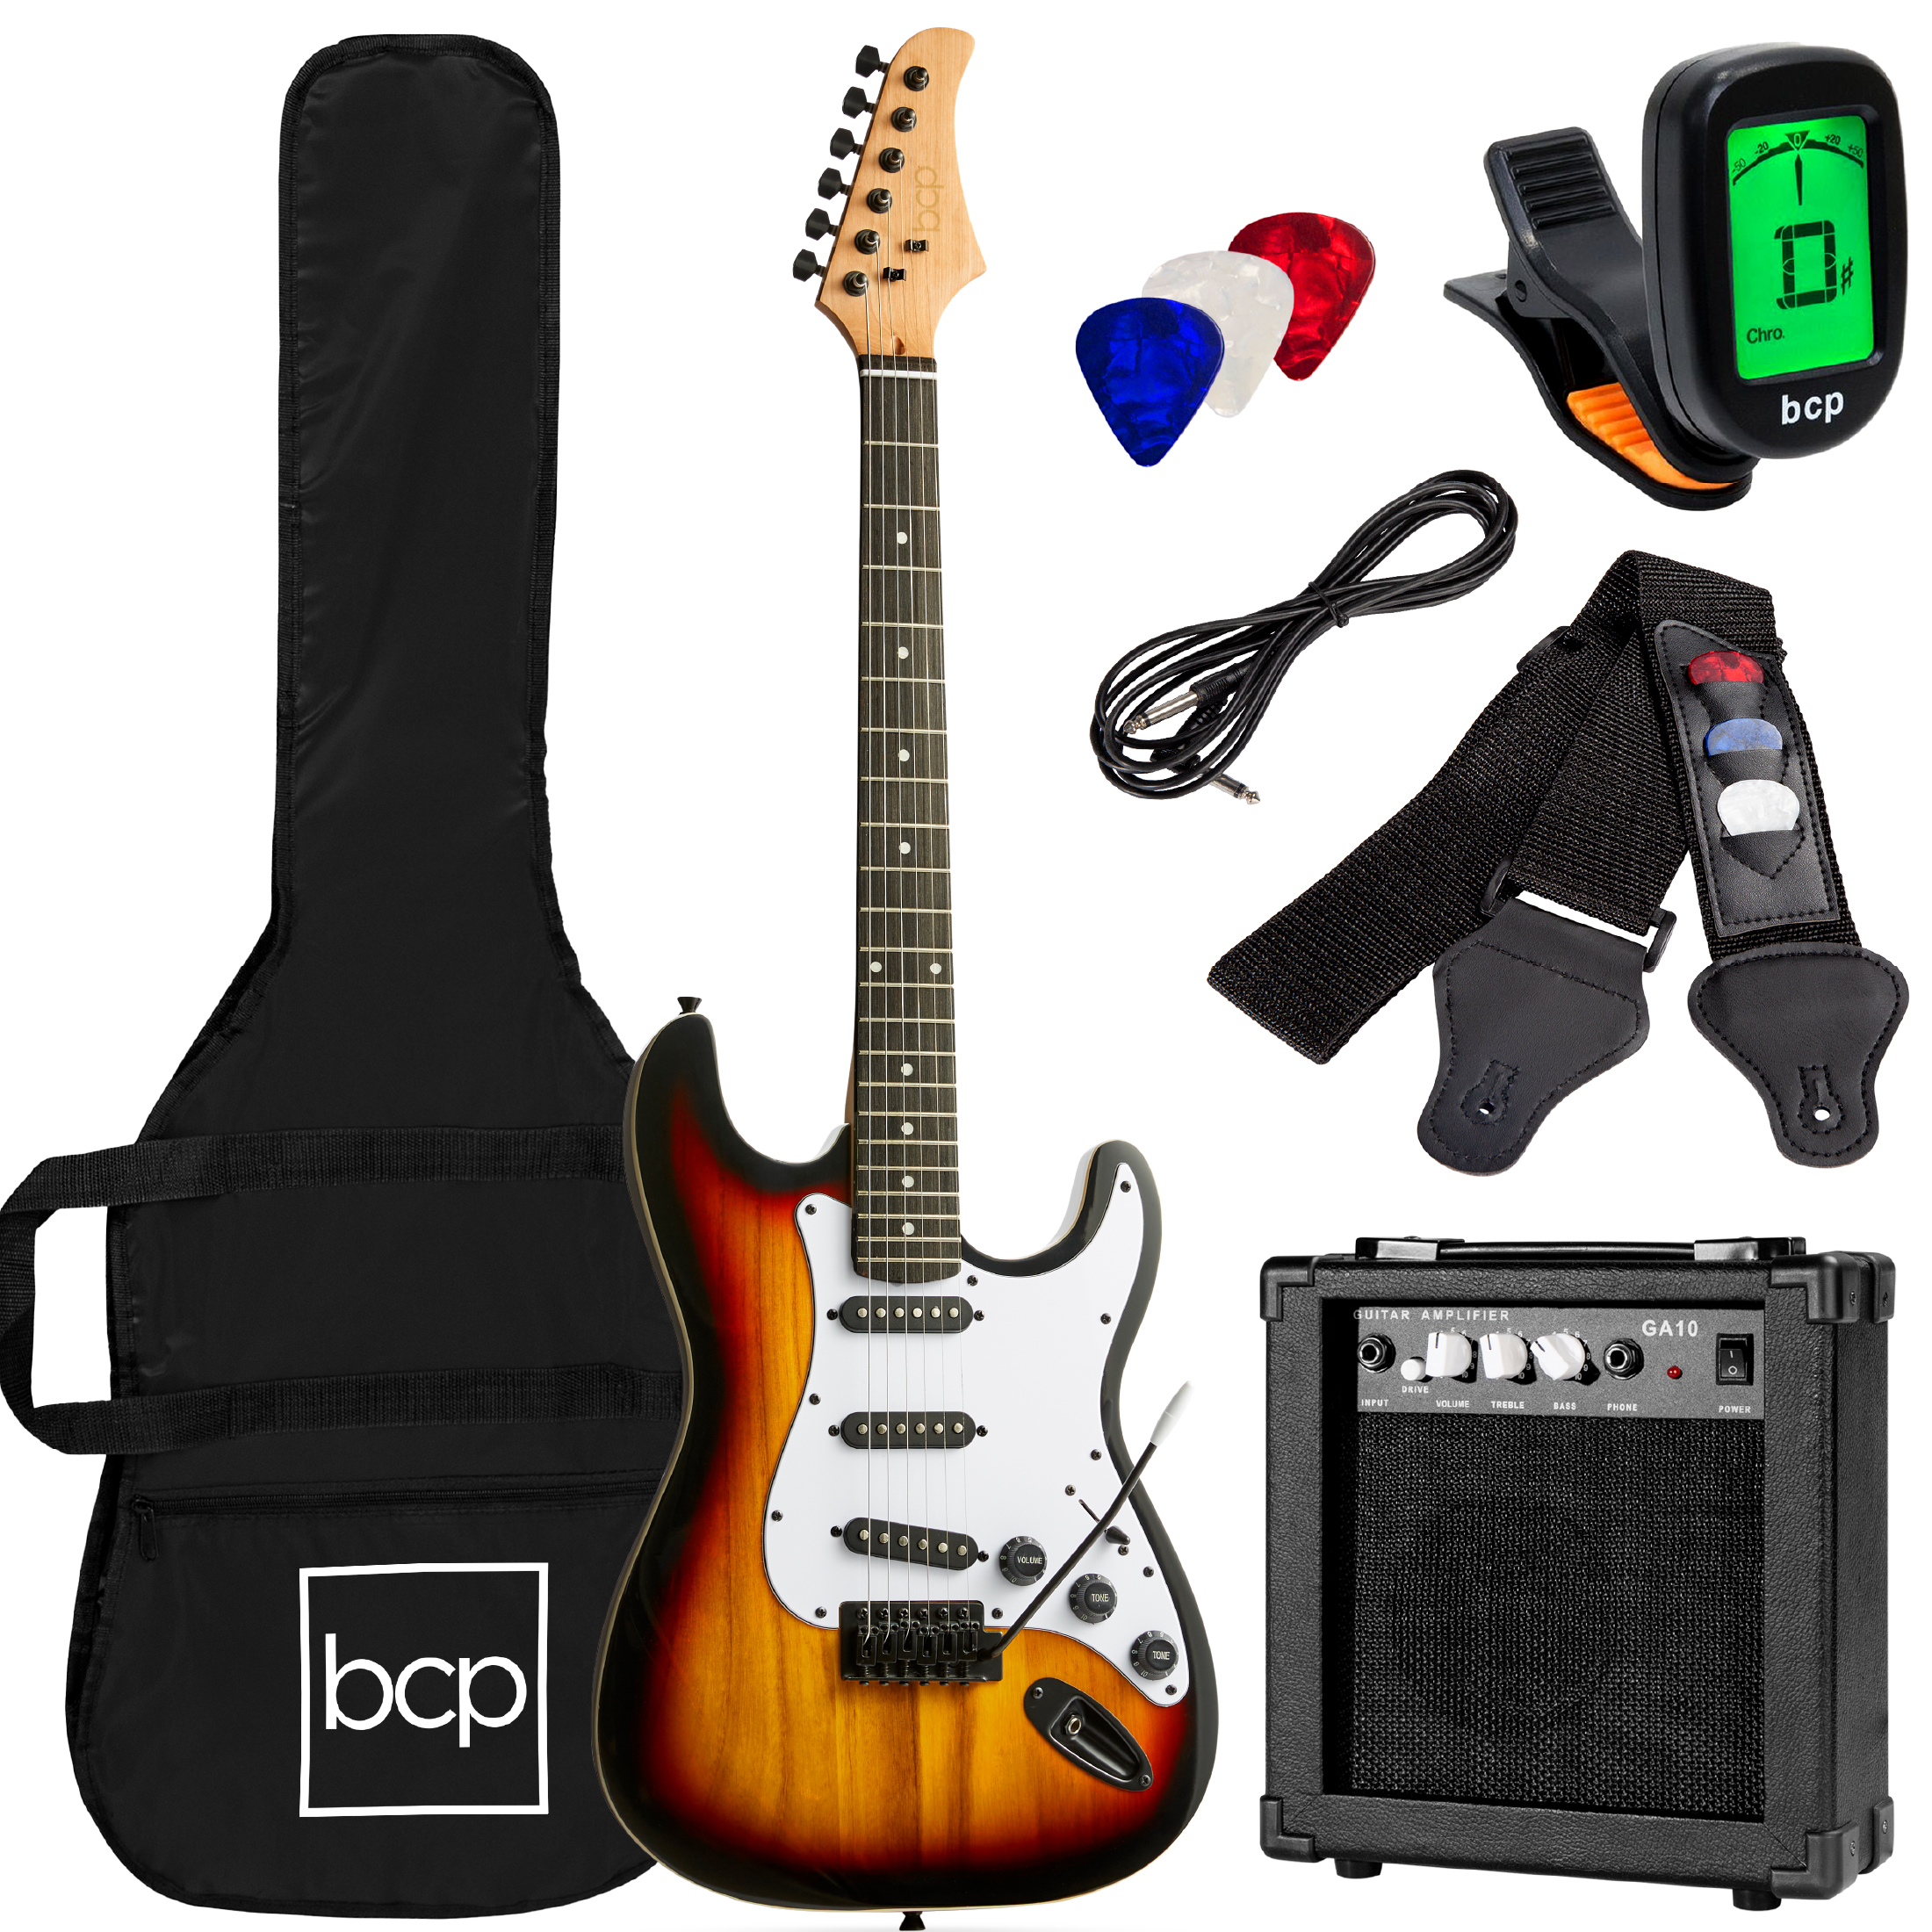 Best Choice Products 39in Full Size Beginner Electric Guitar Kit with Case, Strap, Amp, Whammy Bar - 3 Color Sunburst - image 1 of 6